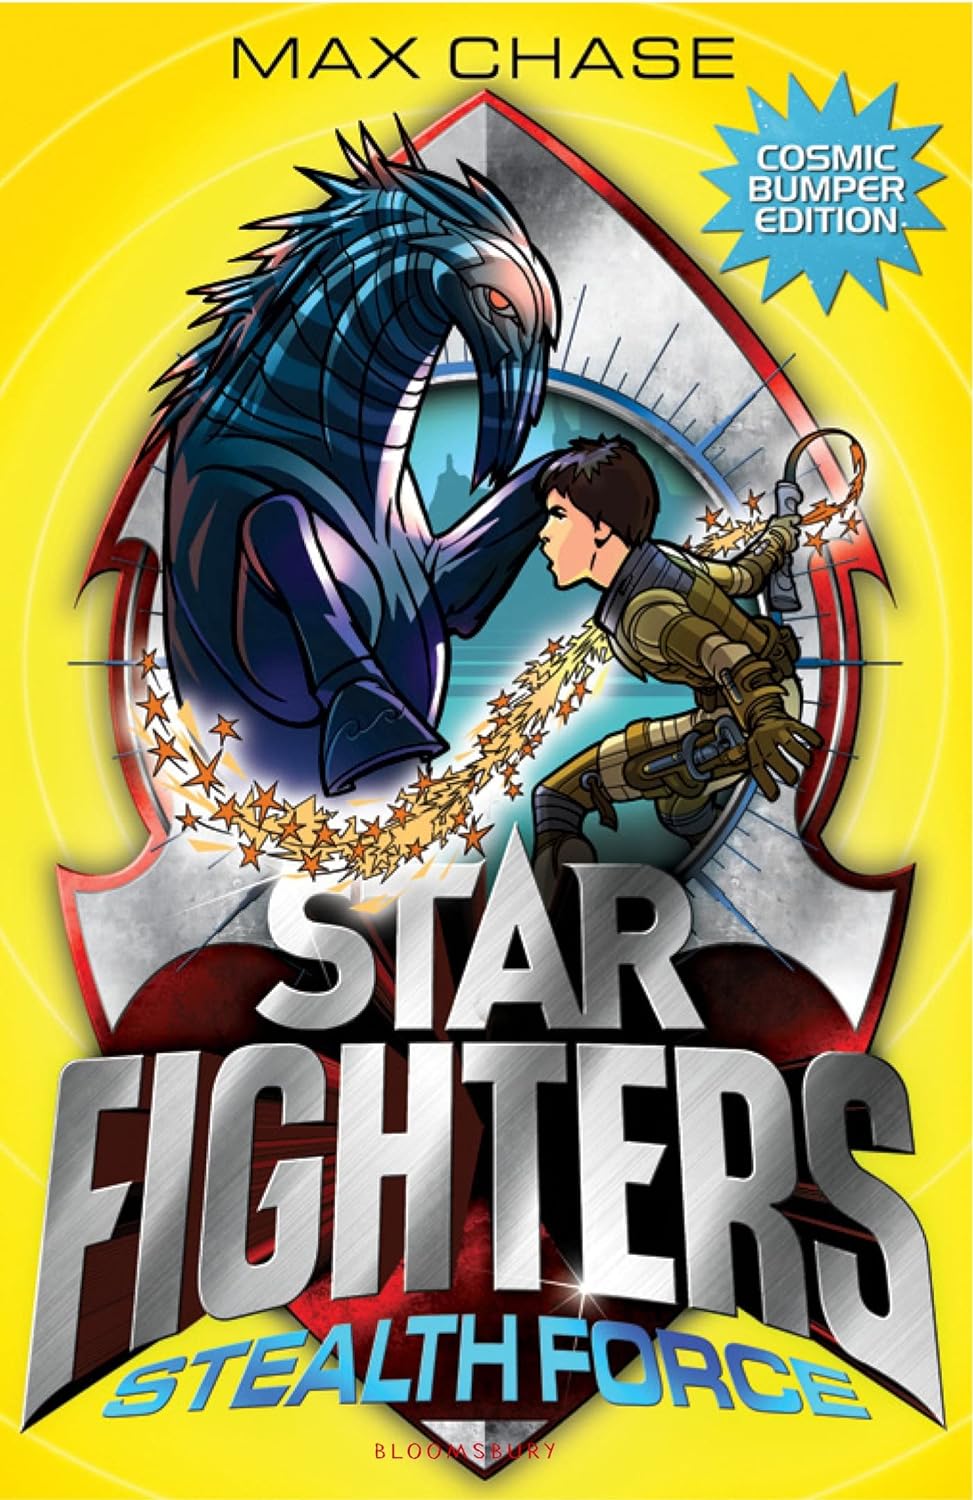 Star Fighters: Stealth Force